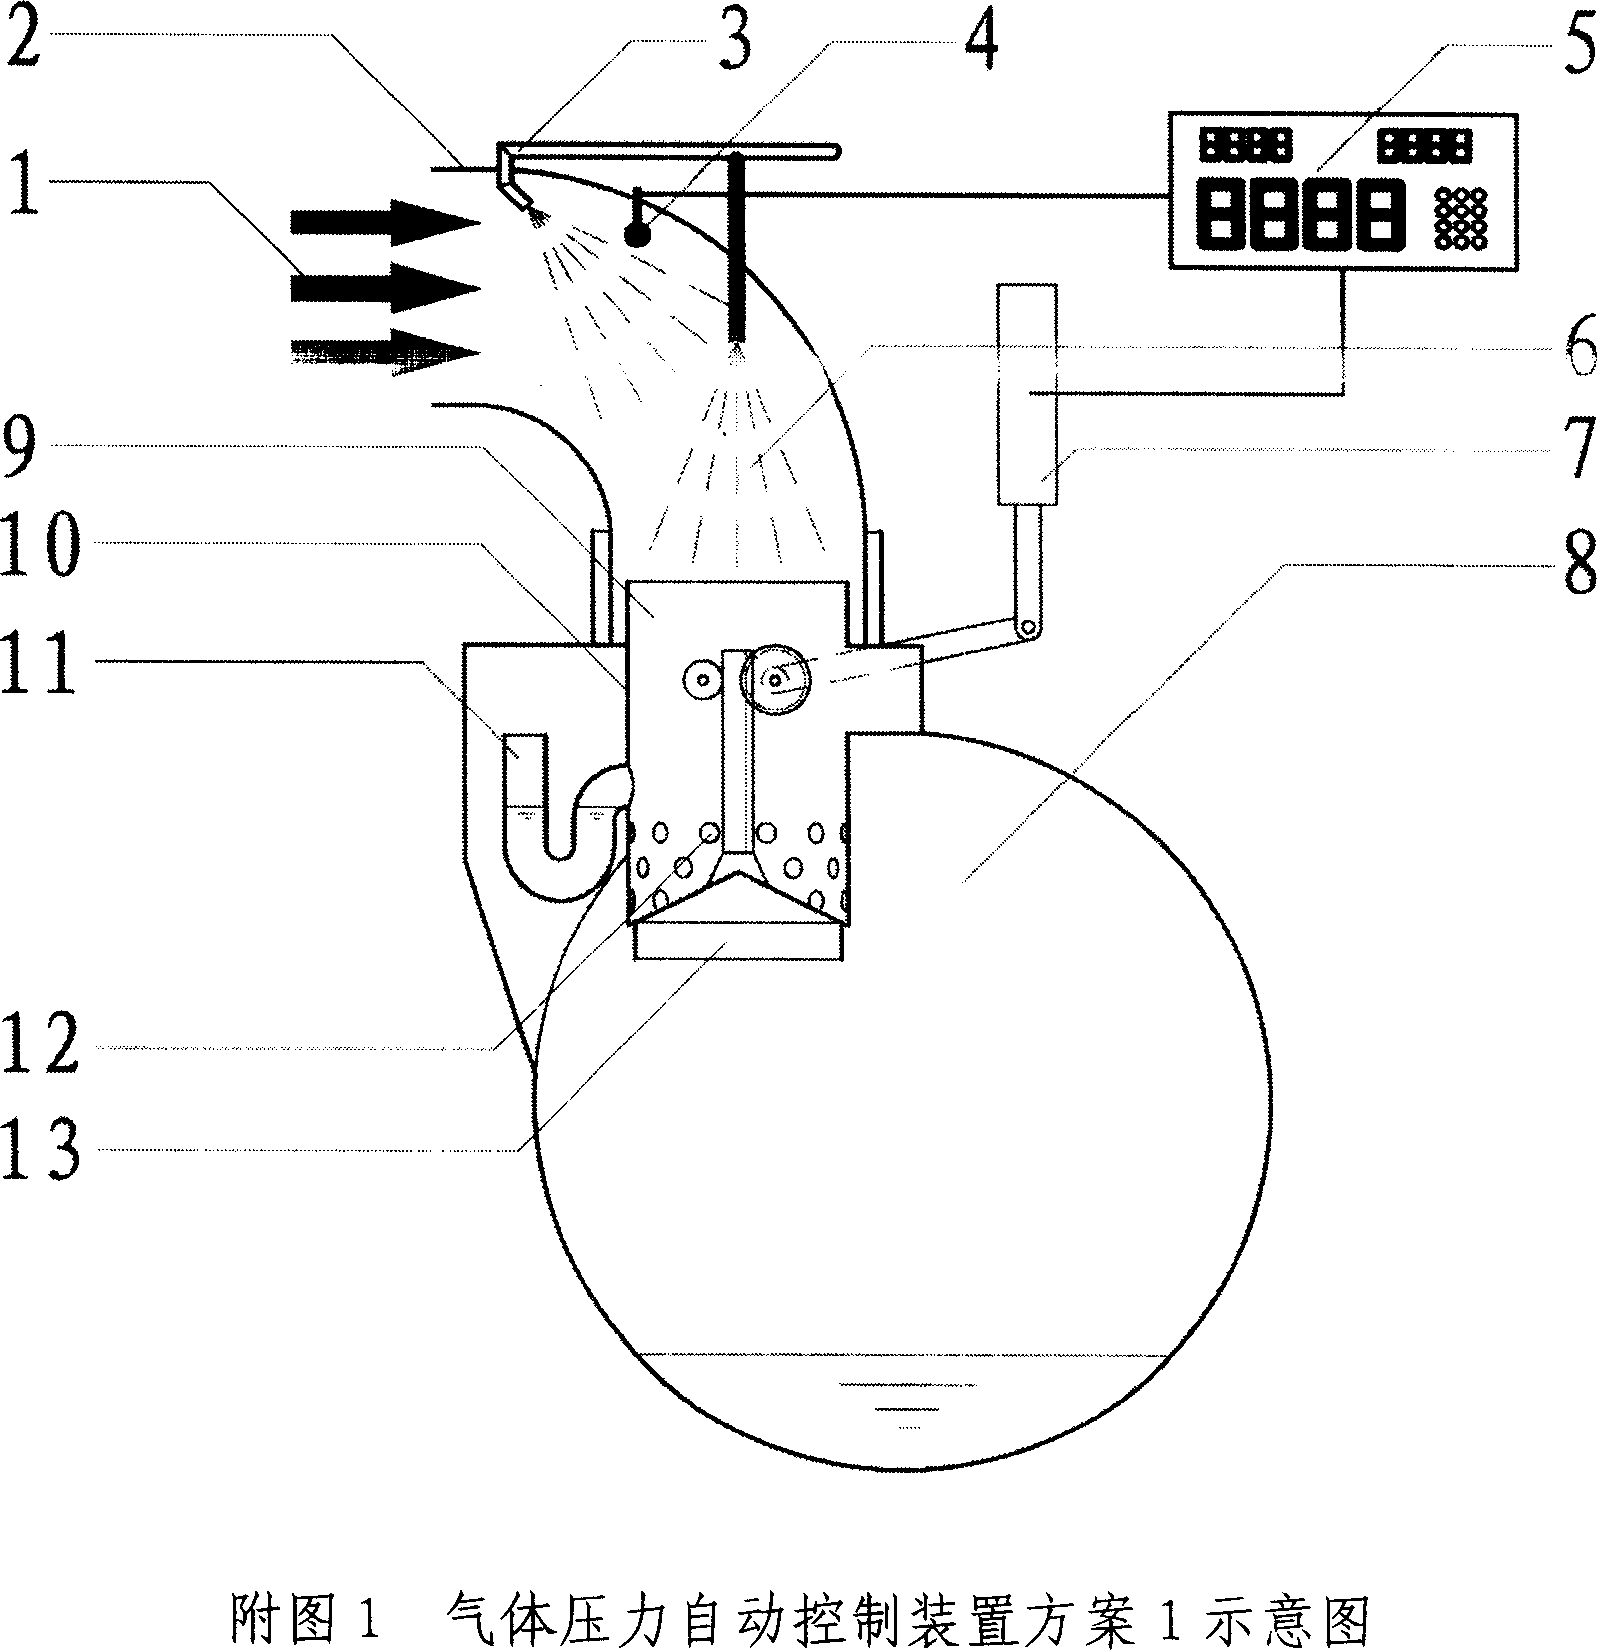 Automatic control device for gas pressure